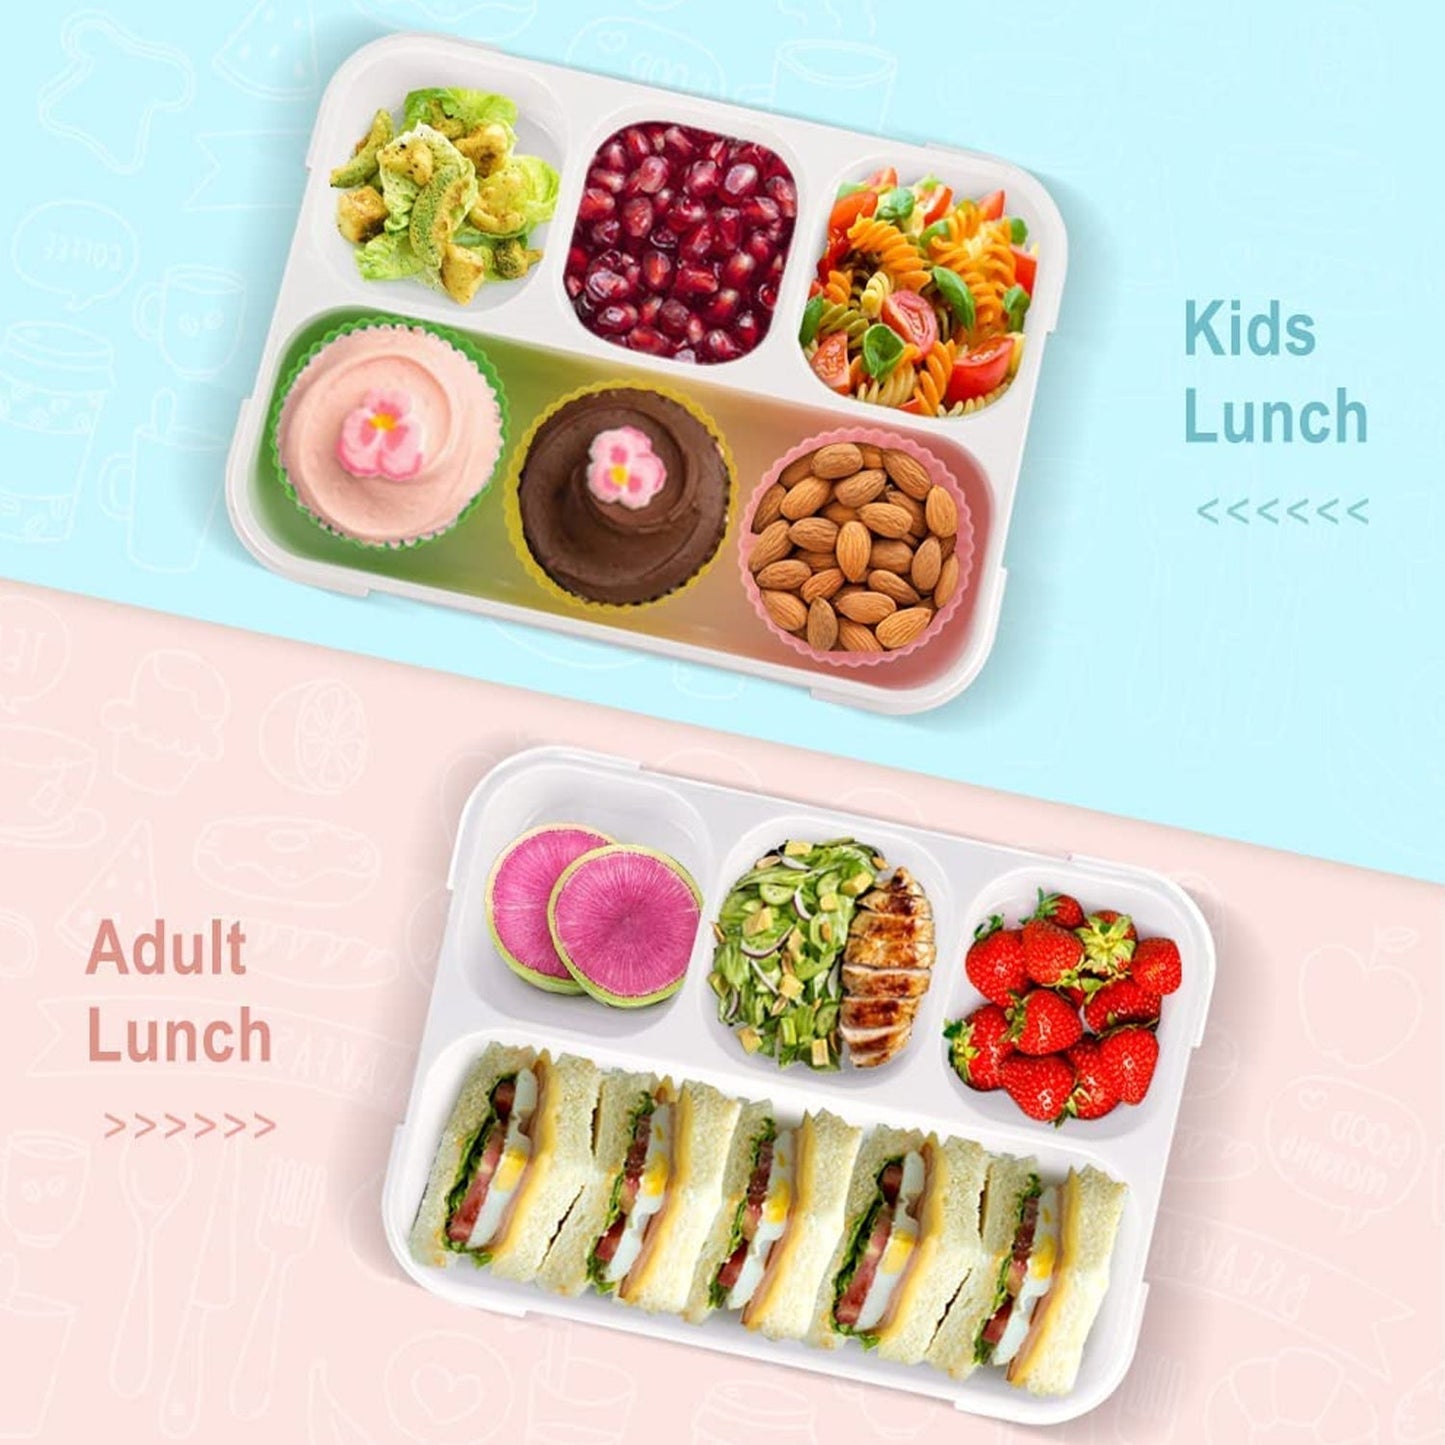 5212 Lunch Box 4 Compartment With Leak Proof Lunch Box For School & Office Use DeoDap